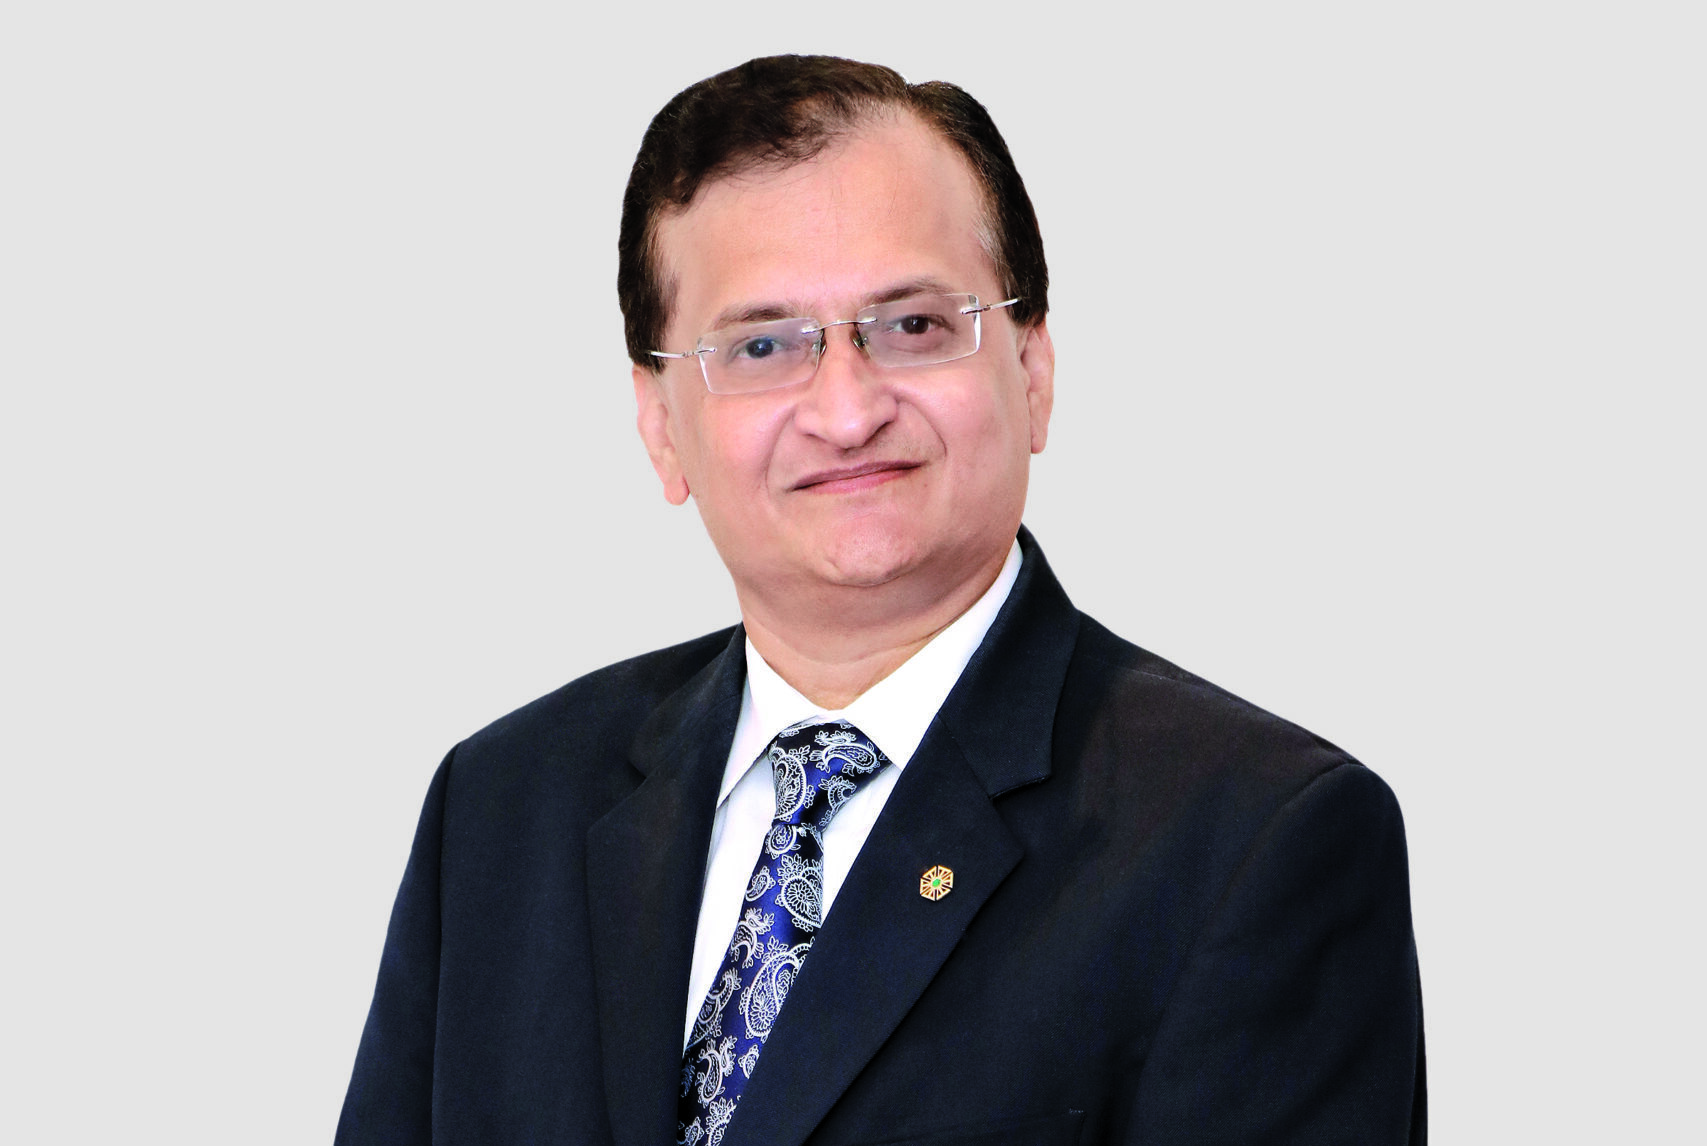 IHCL Promotes Beejal Desai as Executive Vice President for Corporate Affairs and Company Secretary (Group)